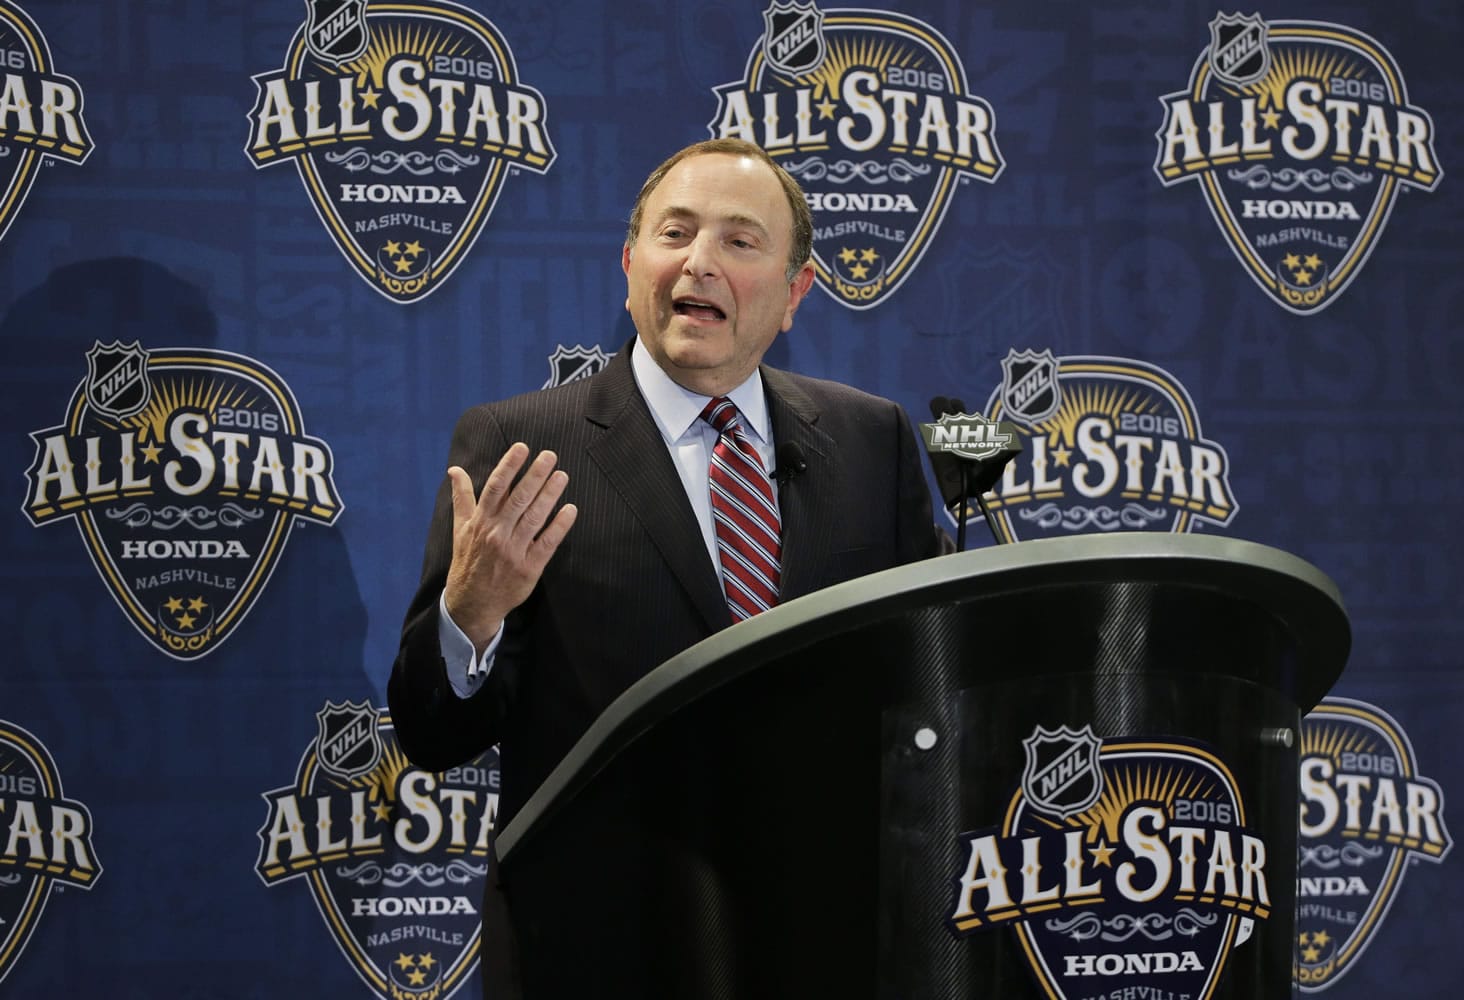 NHL commissioner Gary Bettman answers a question during a news conference before the NHL All-Star hockey game skills competition, Saturday, Jan. 30, 2016, in Nashville, Tenn.